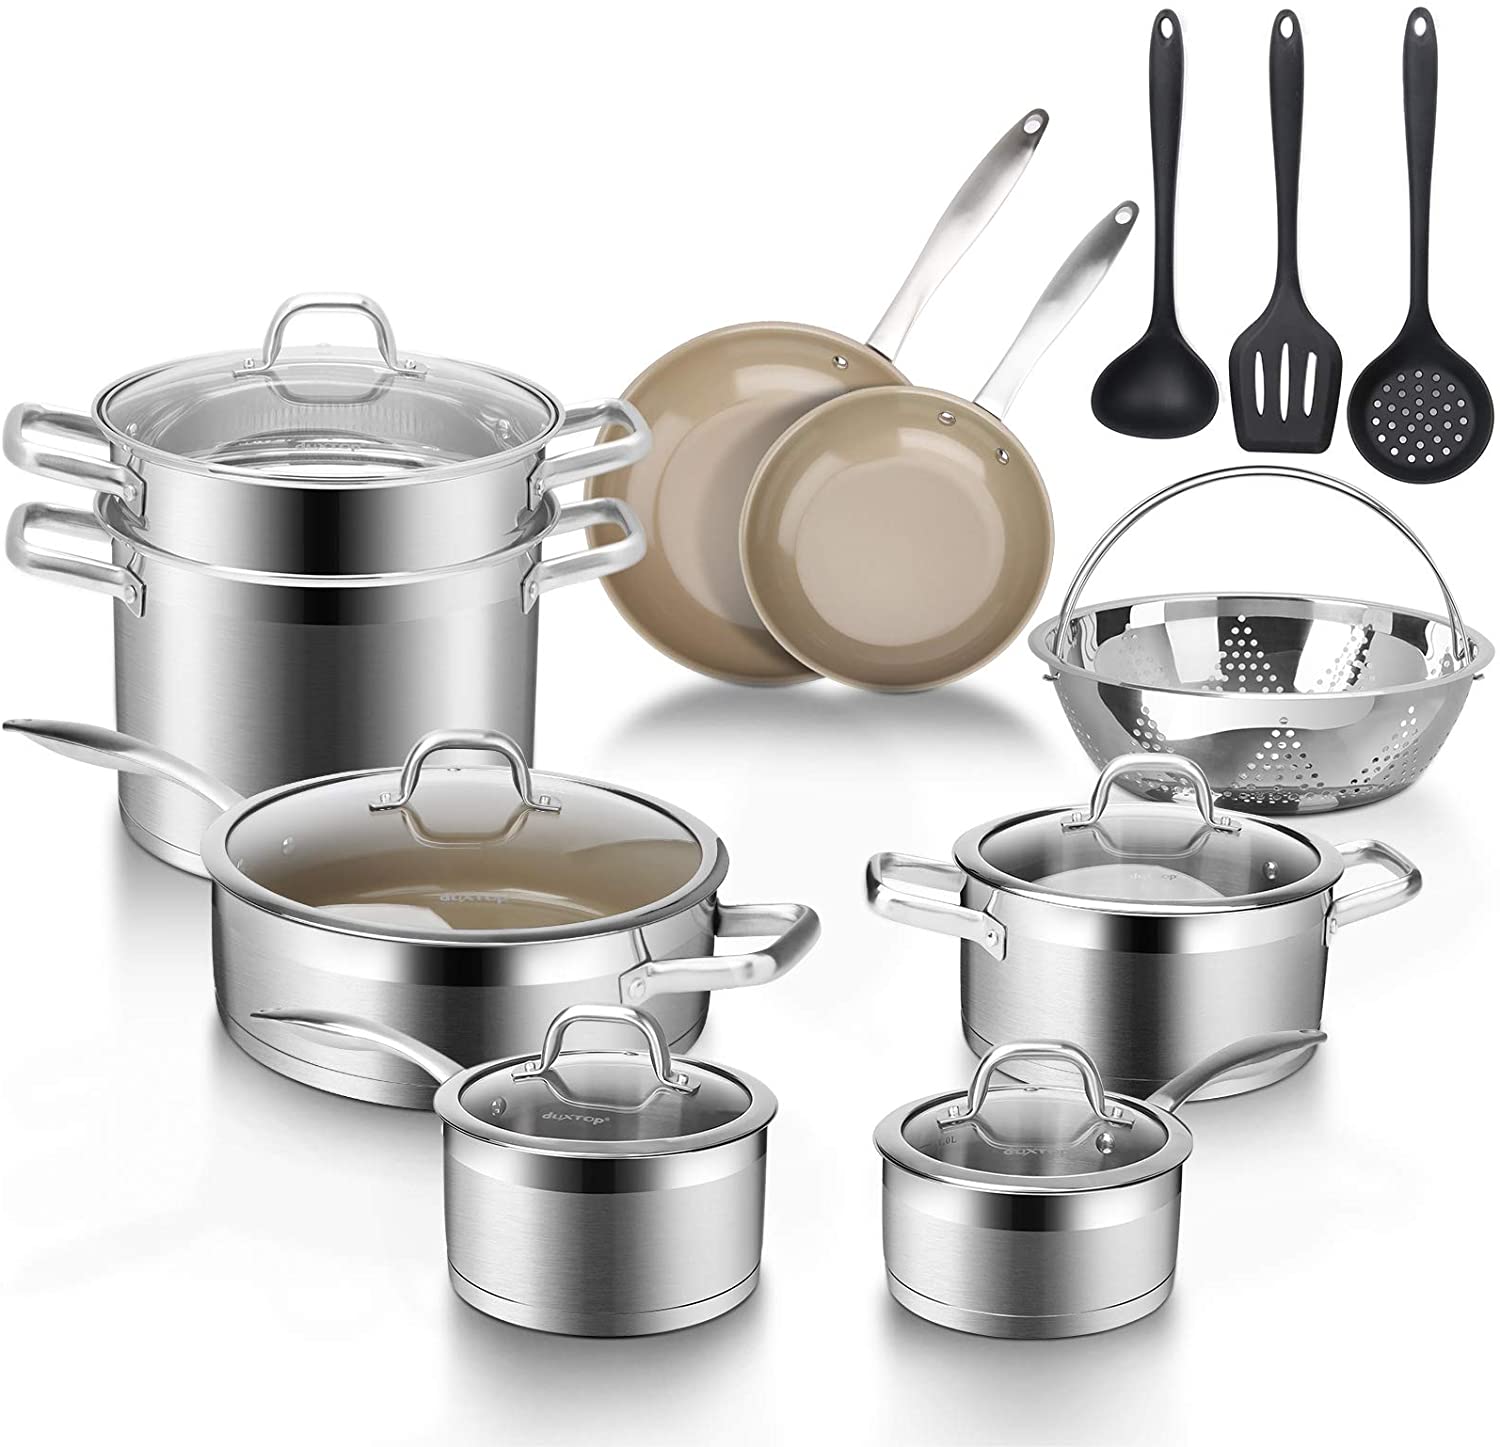 Duxtop 17PC Professional Induction Cookware Set with Fusion Titanium Reinforced Ceramic Coating